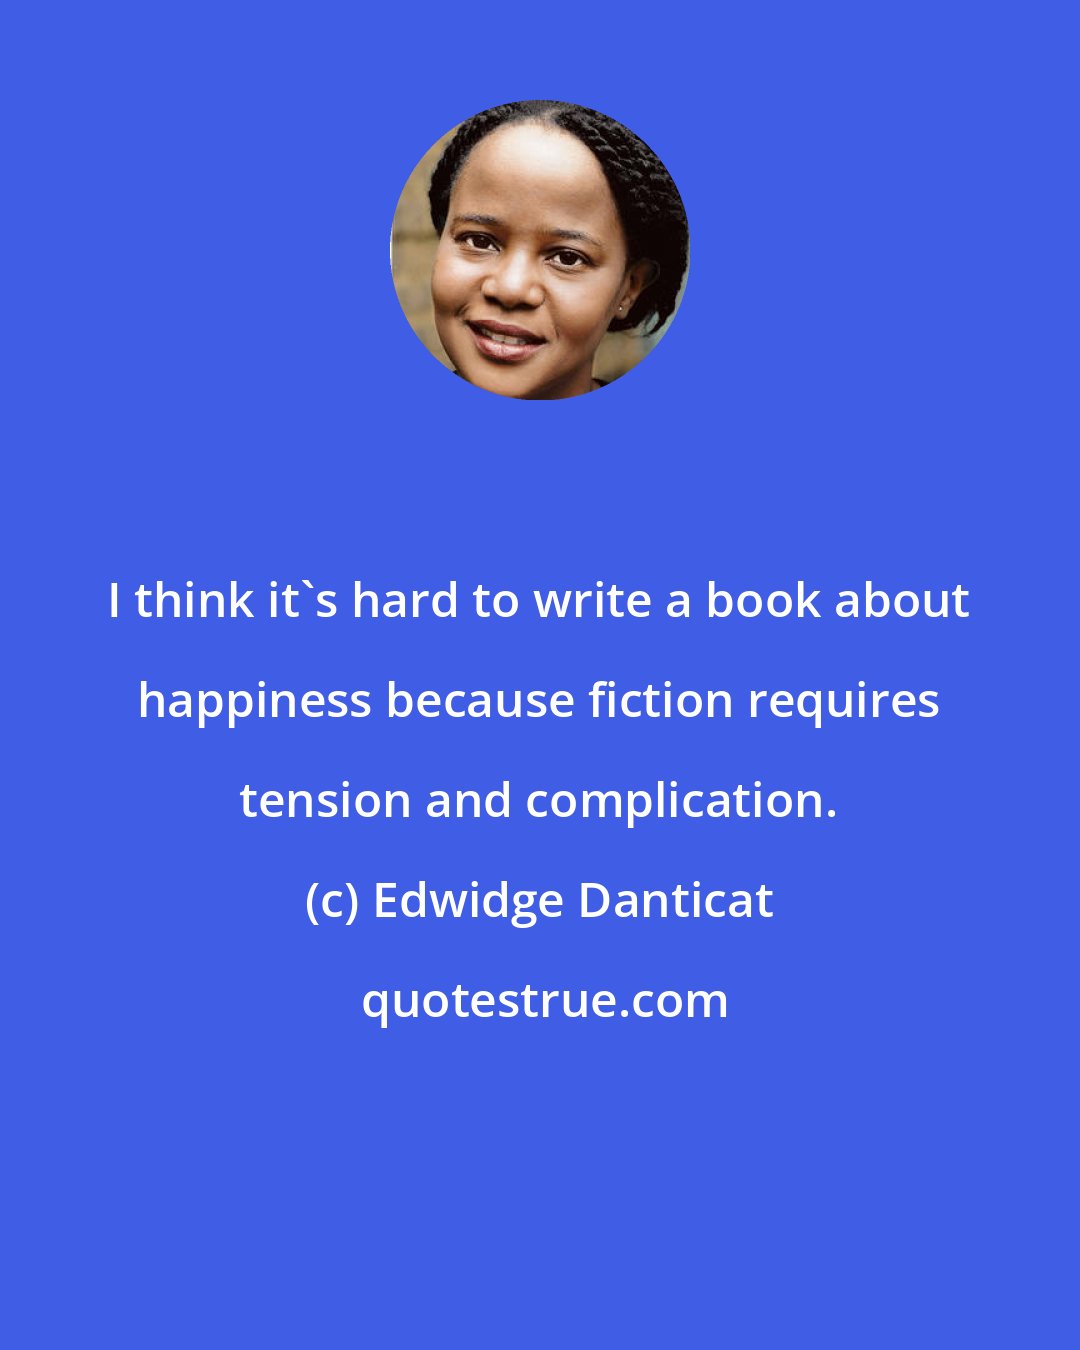 Edwidge Danticat: I think it's hard to write a book about happiness because fiction requires tension and complication.